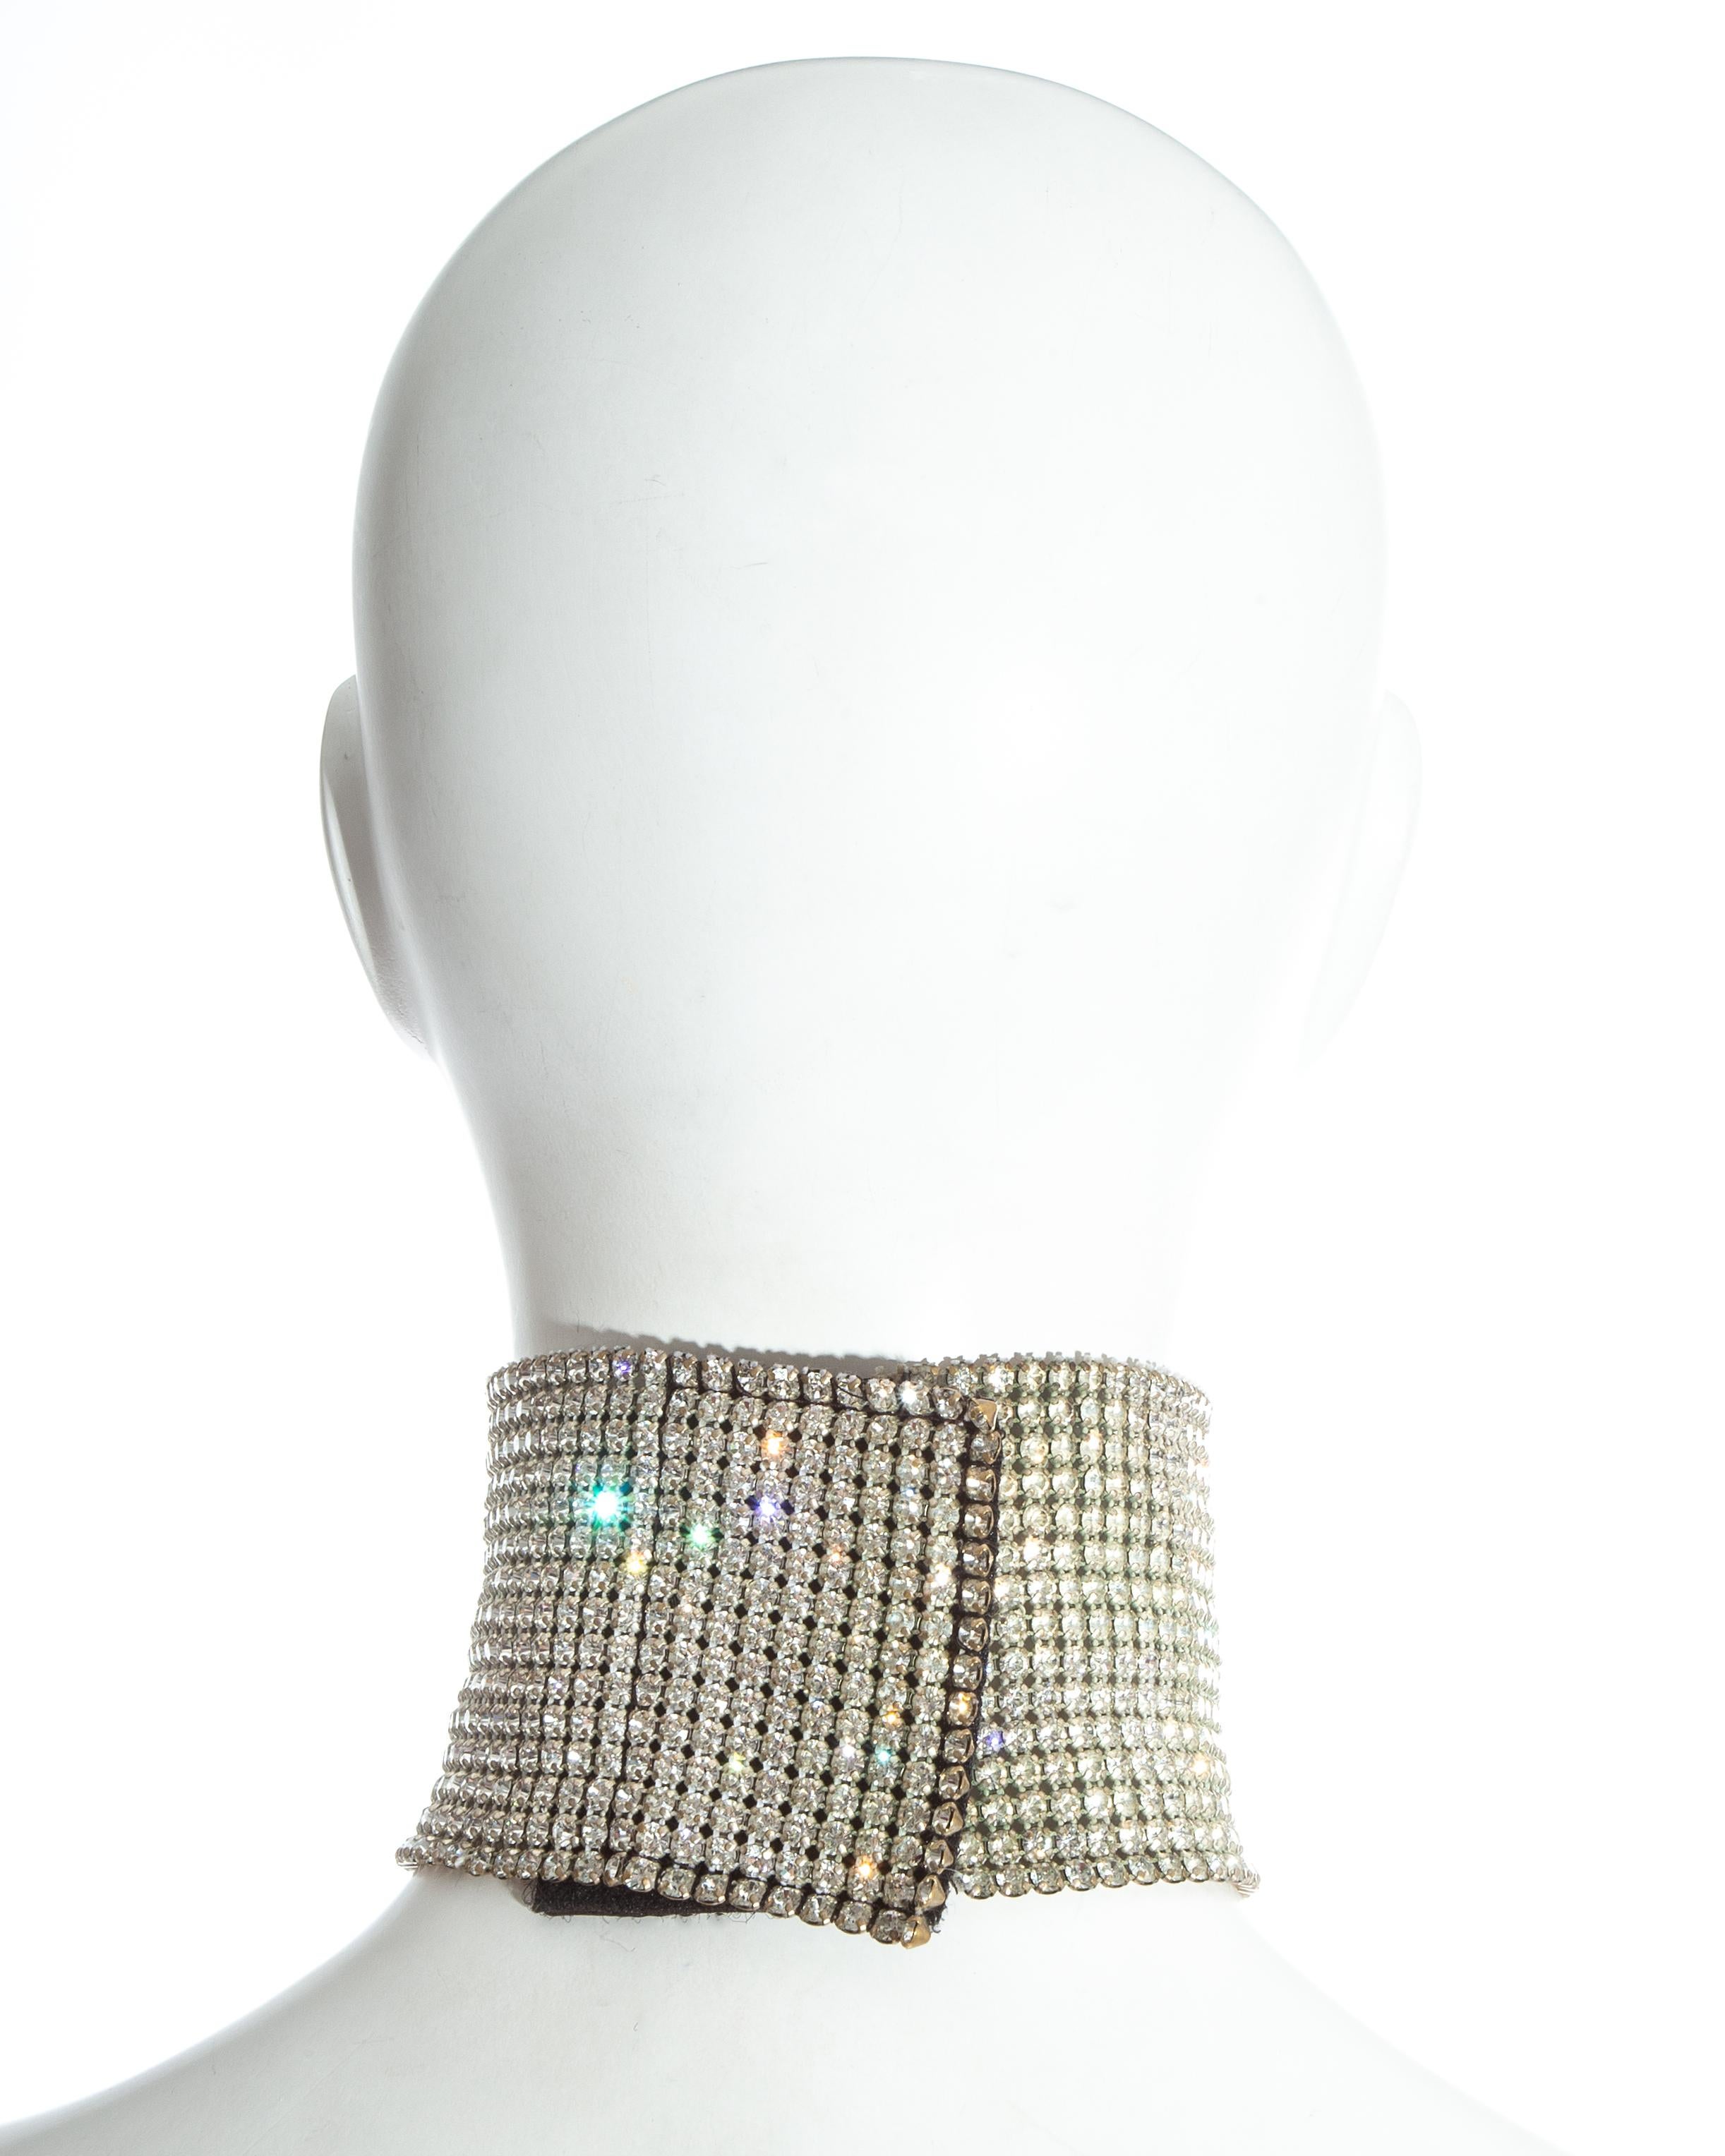 Dolce and Gabbana silver crystal mesh choker necklace, ss 2000 at 